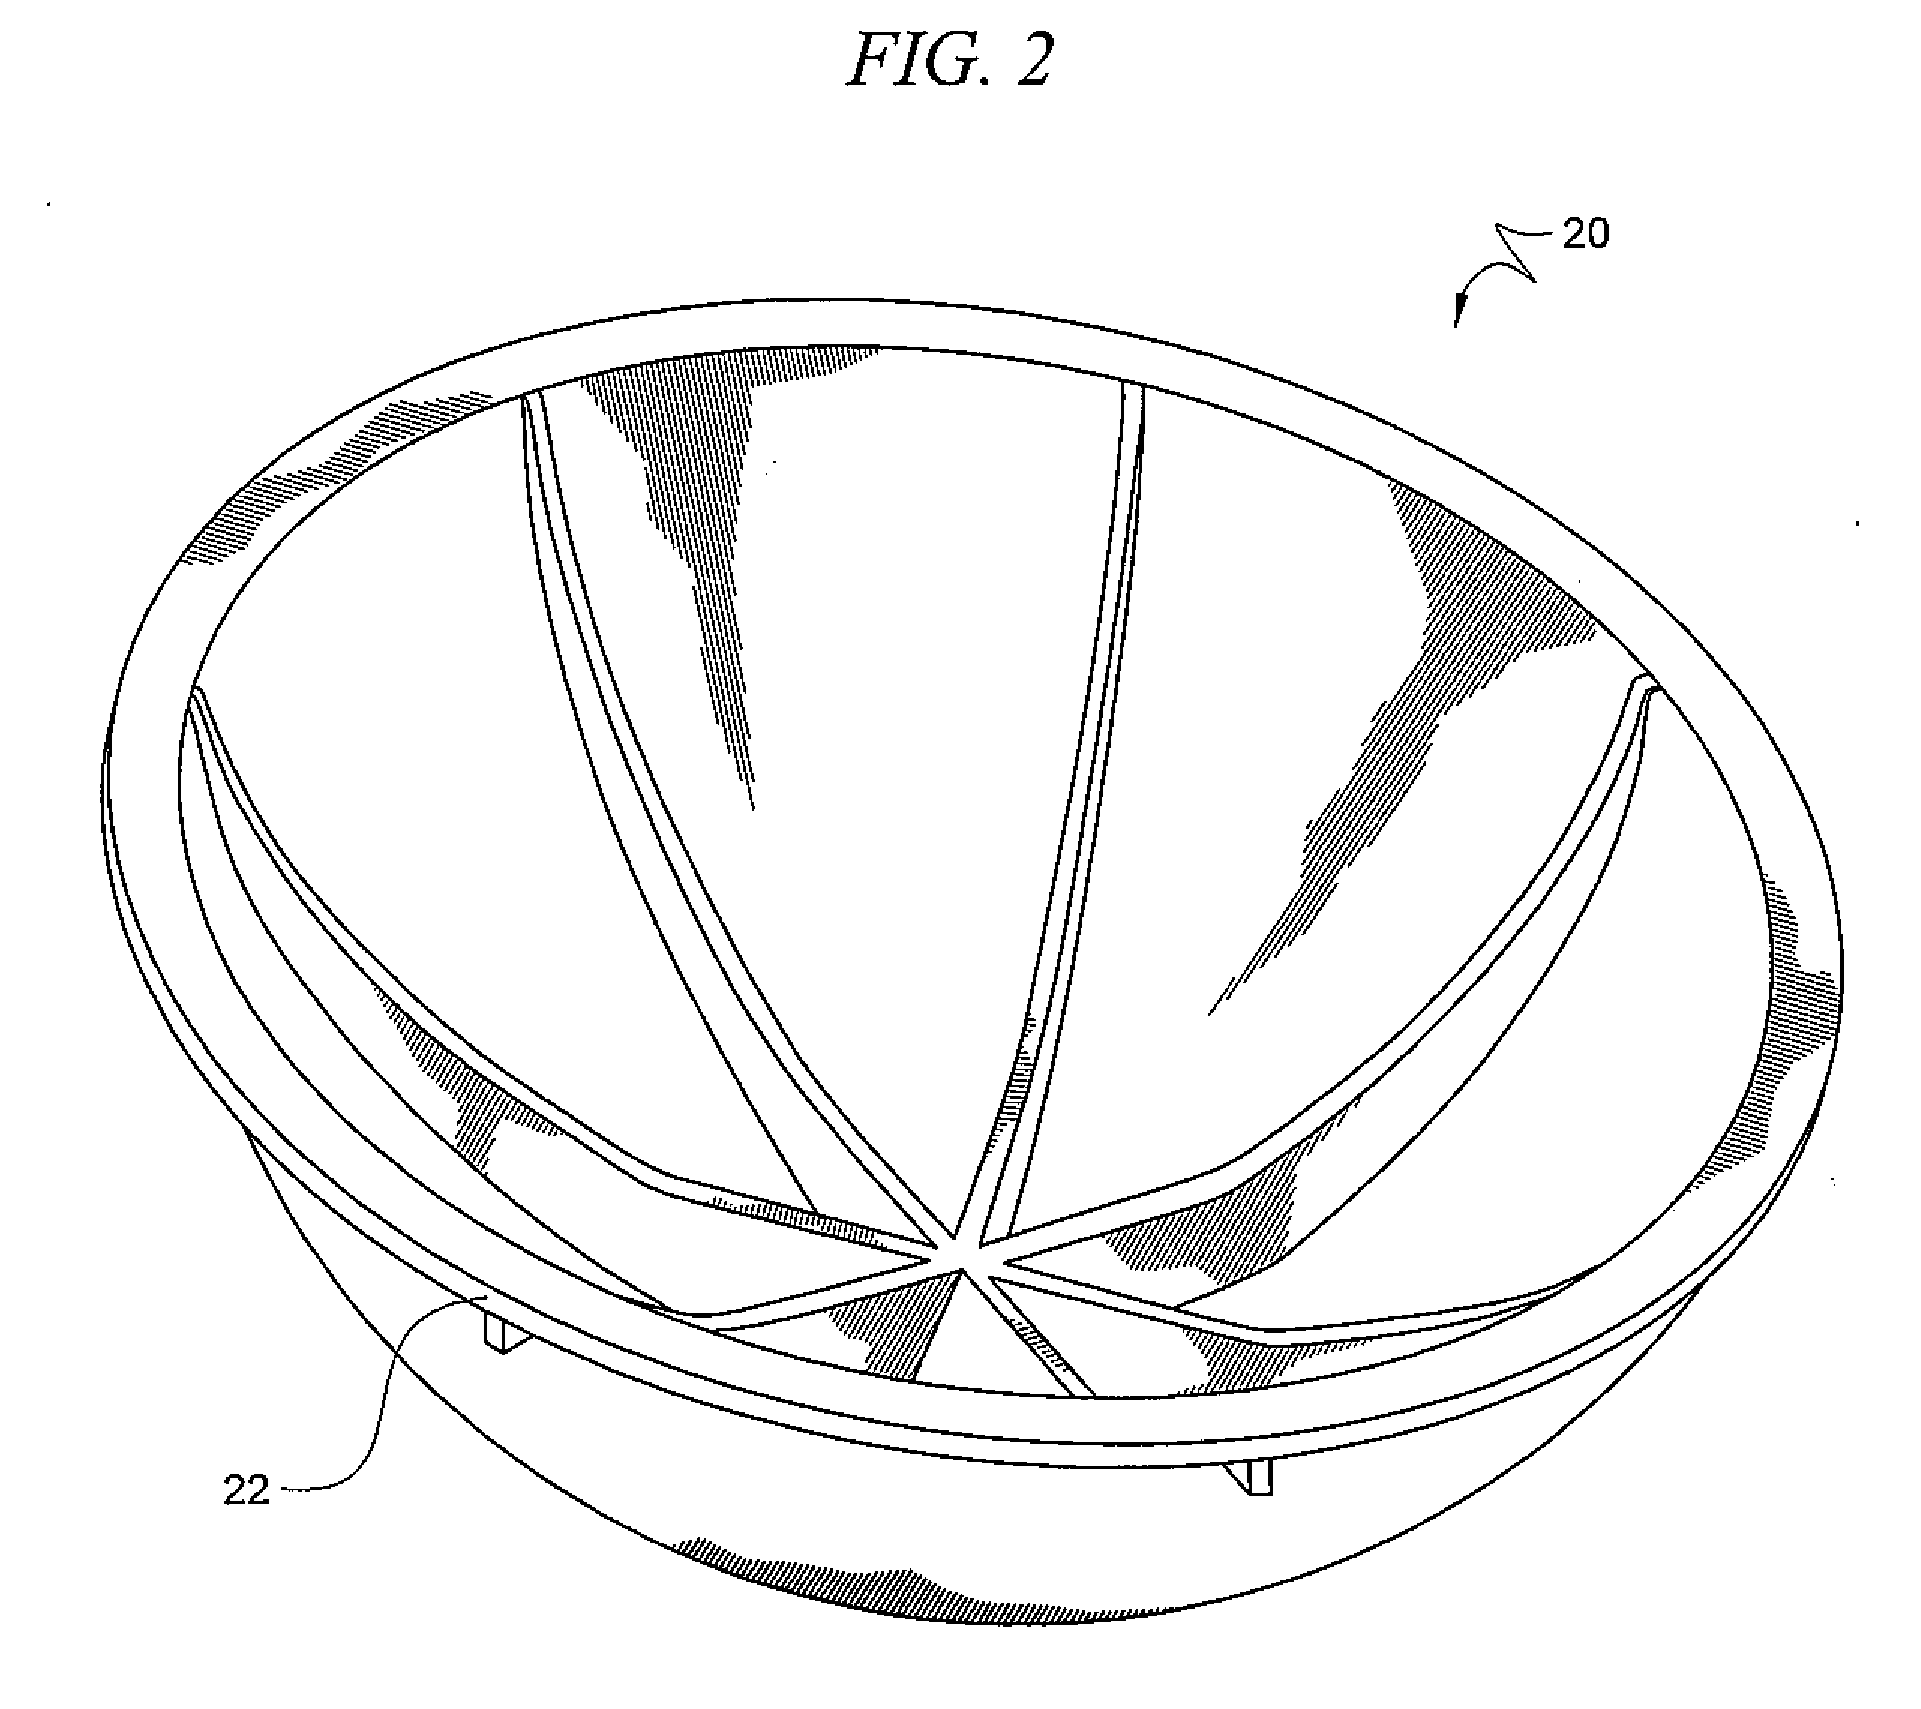 System and method for converting ocean wave energy into electricity